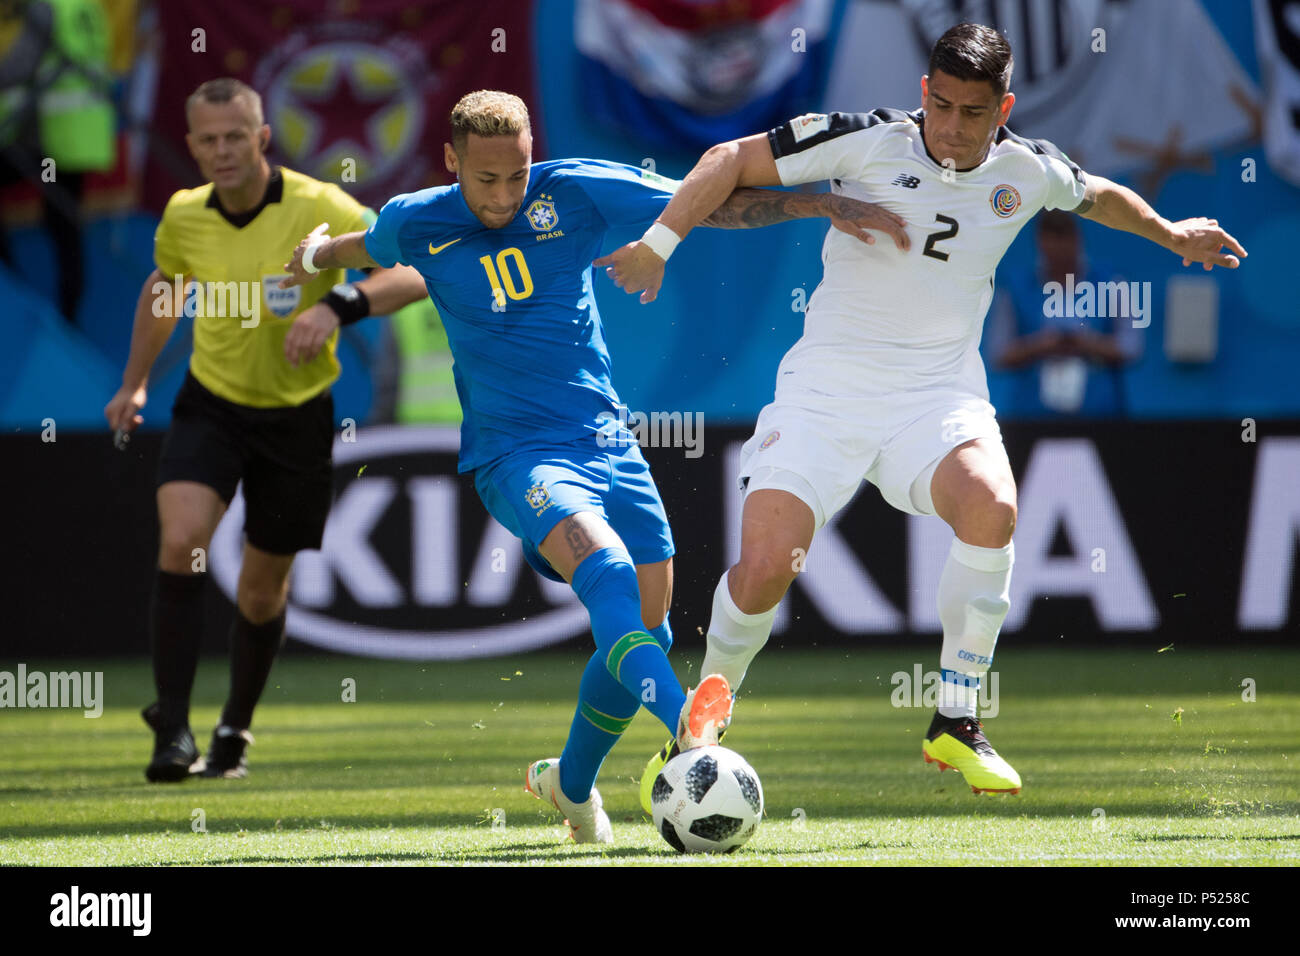 22 June 2018, Russia, St. Petersburg, Soccer, FIFA World Cup, Brazil vs Costa Rica, Matchday 2 of 3 at Saint Petersburg Stadium: Neymar from Brazil (L) and Johnny Acosta from Costa Rica fight for the ball. Photo: Federico Gambarini/dpa Stock Photo